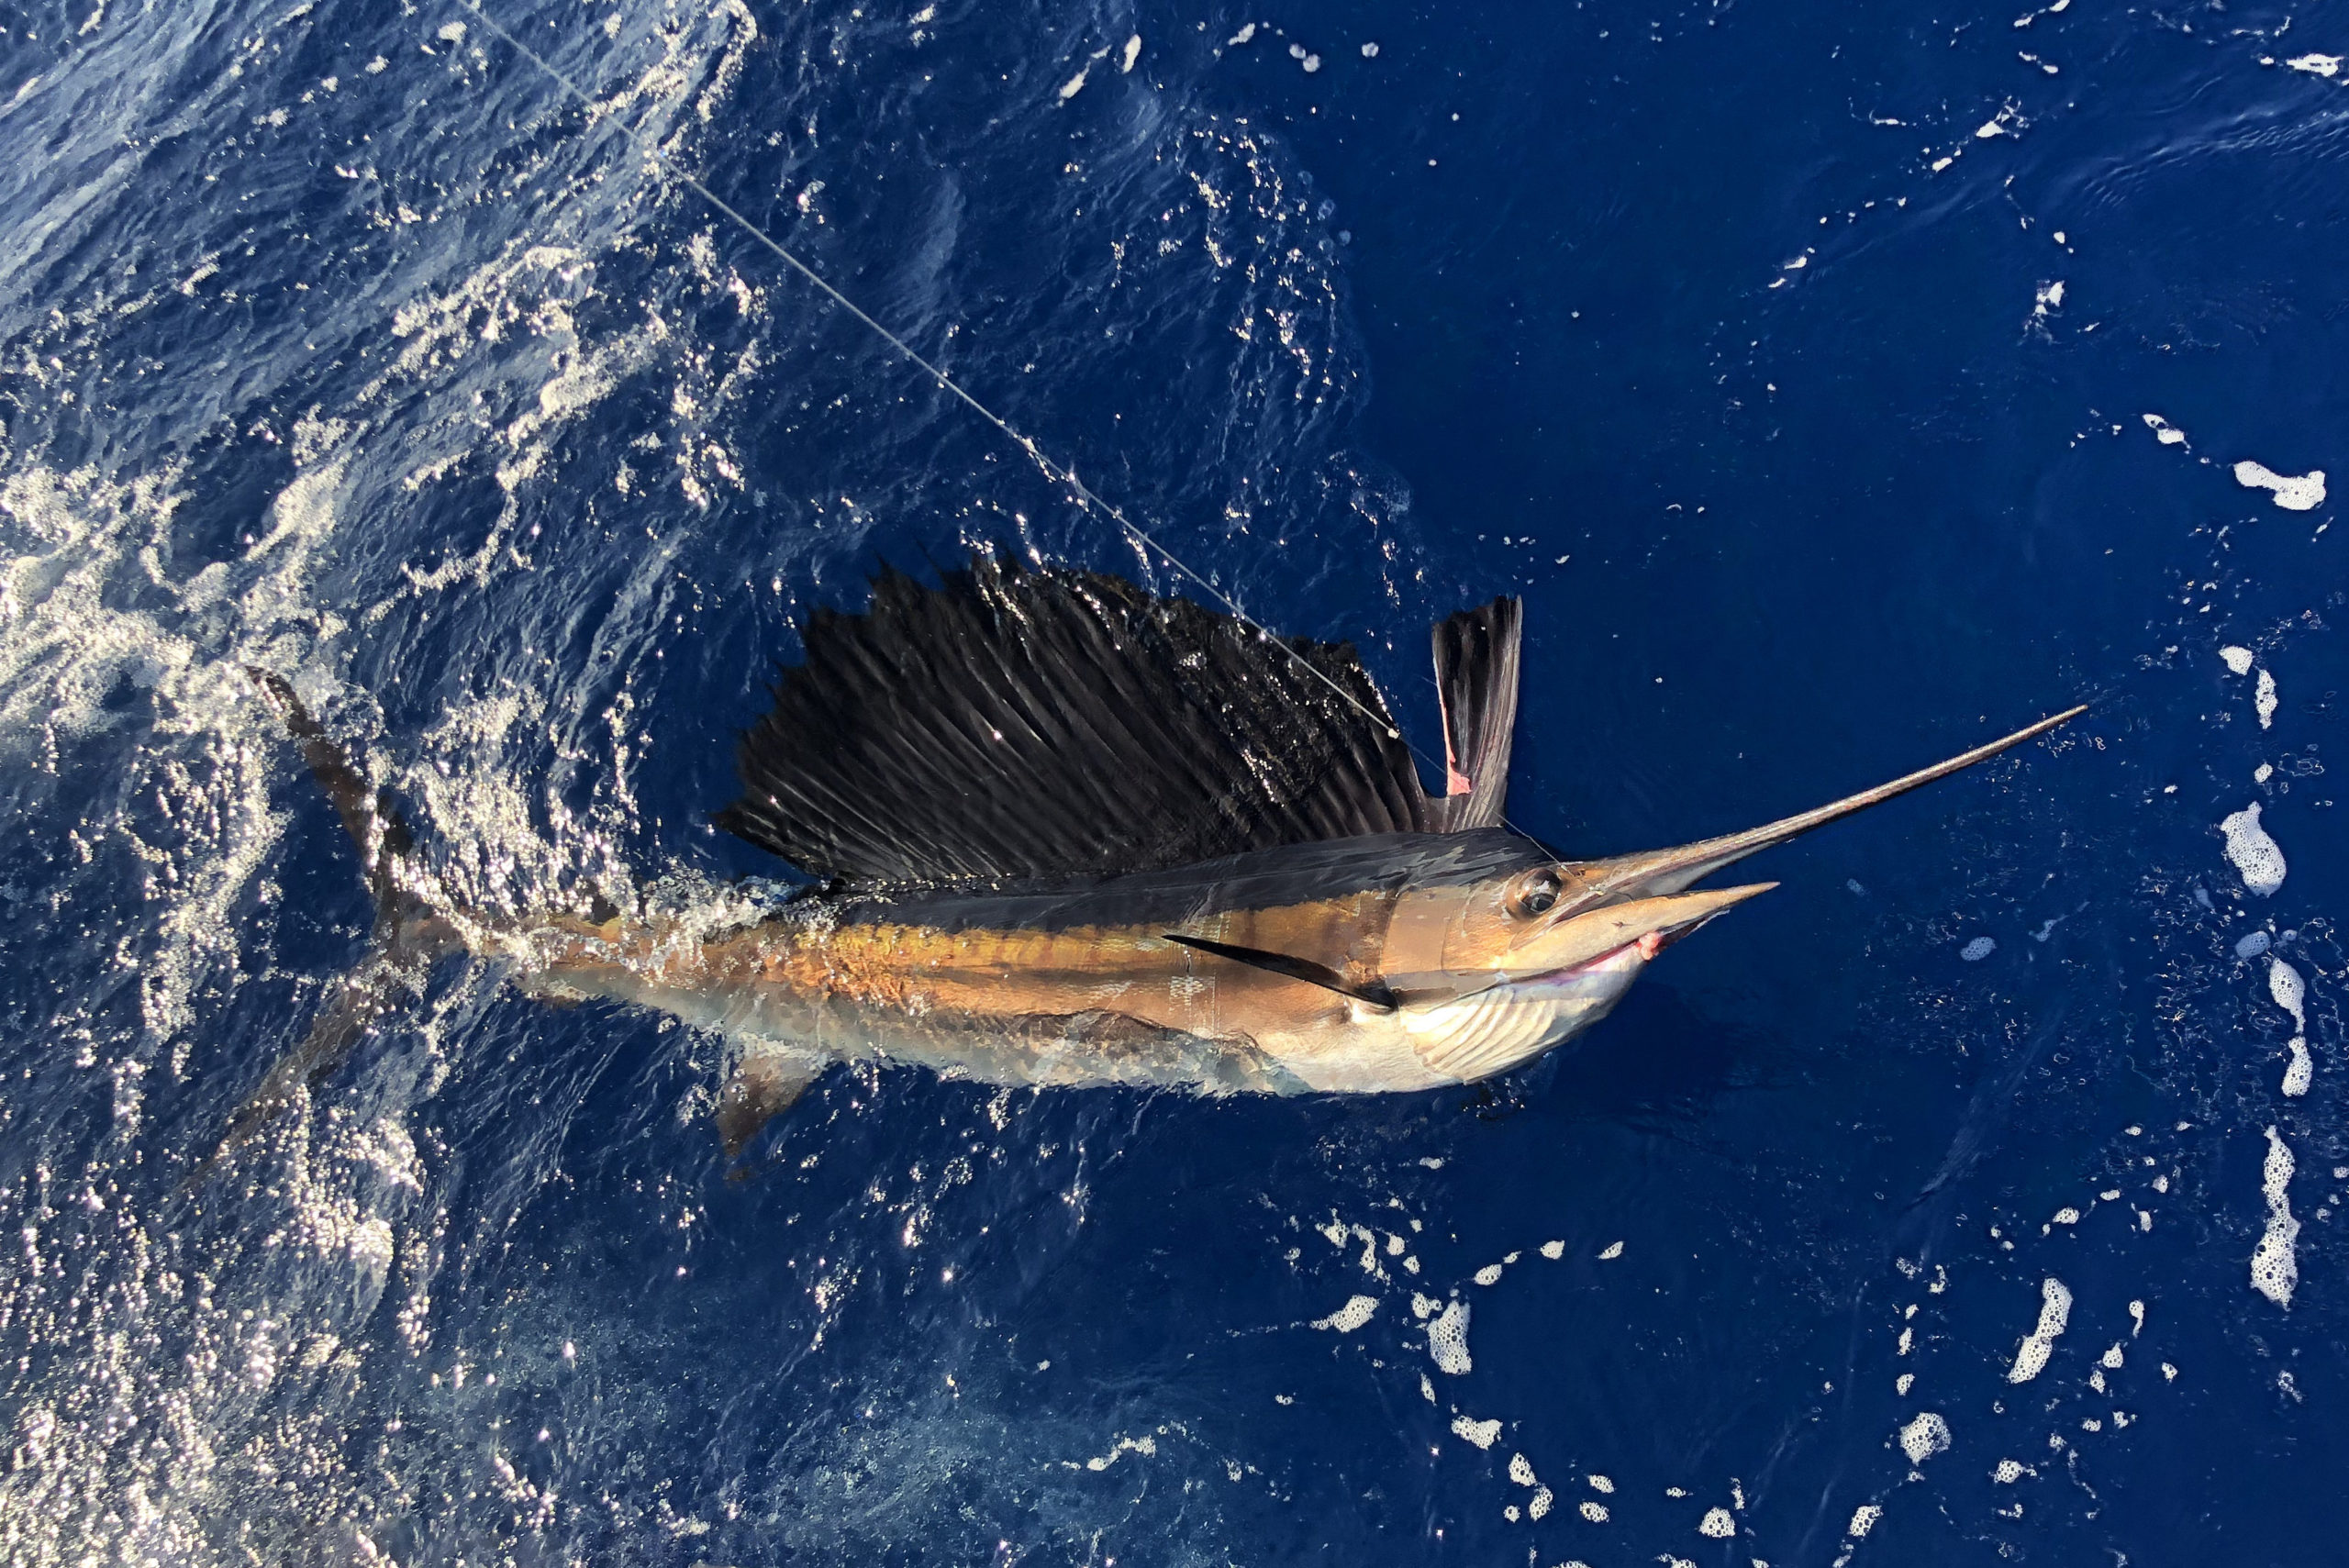 A Sailfish in the water next to a Key West fishing charter